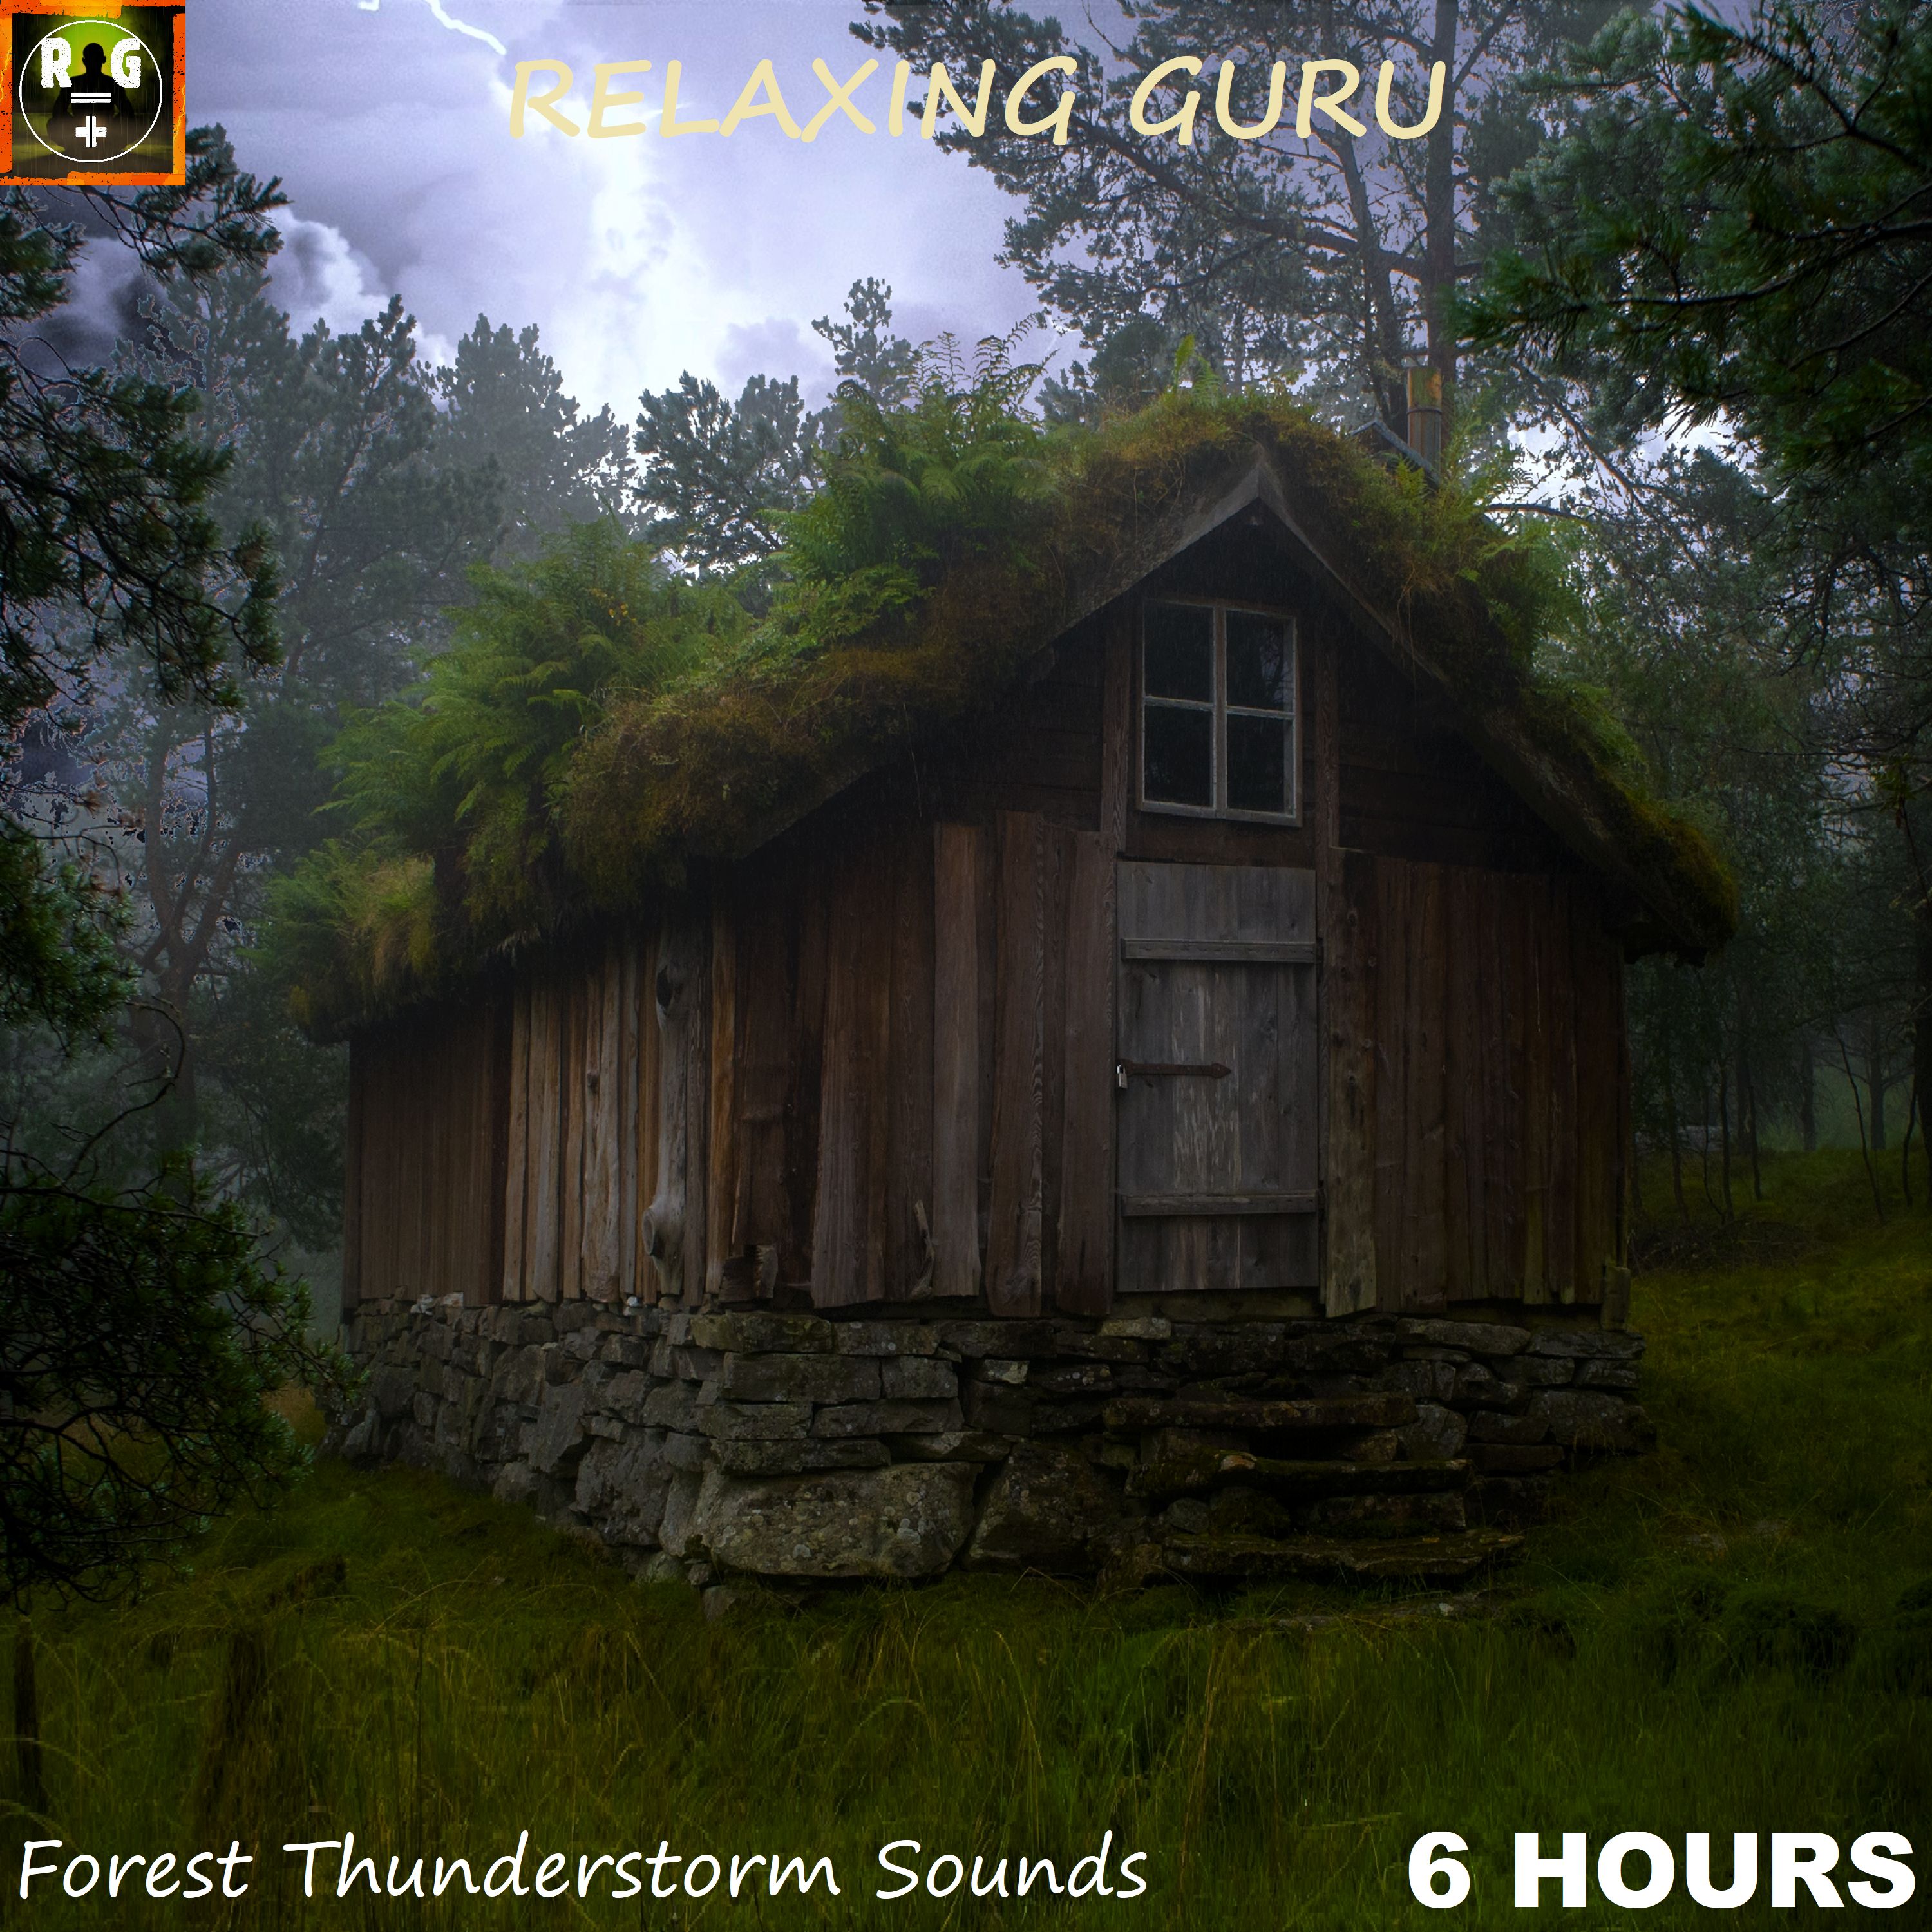 Muat turun Relaxing Rain & Thunder on a Wooden Hut deep in the Forest - Thunderstorm Sounds for Sleep (6 HOURS)